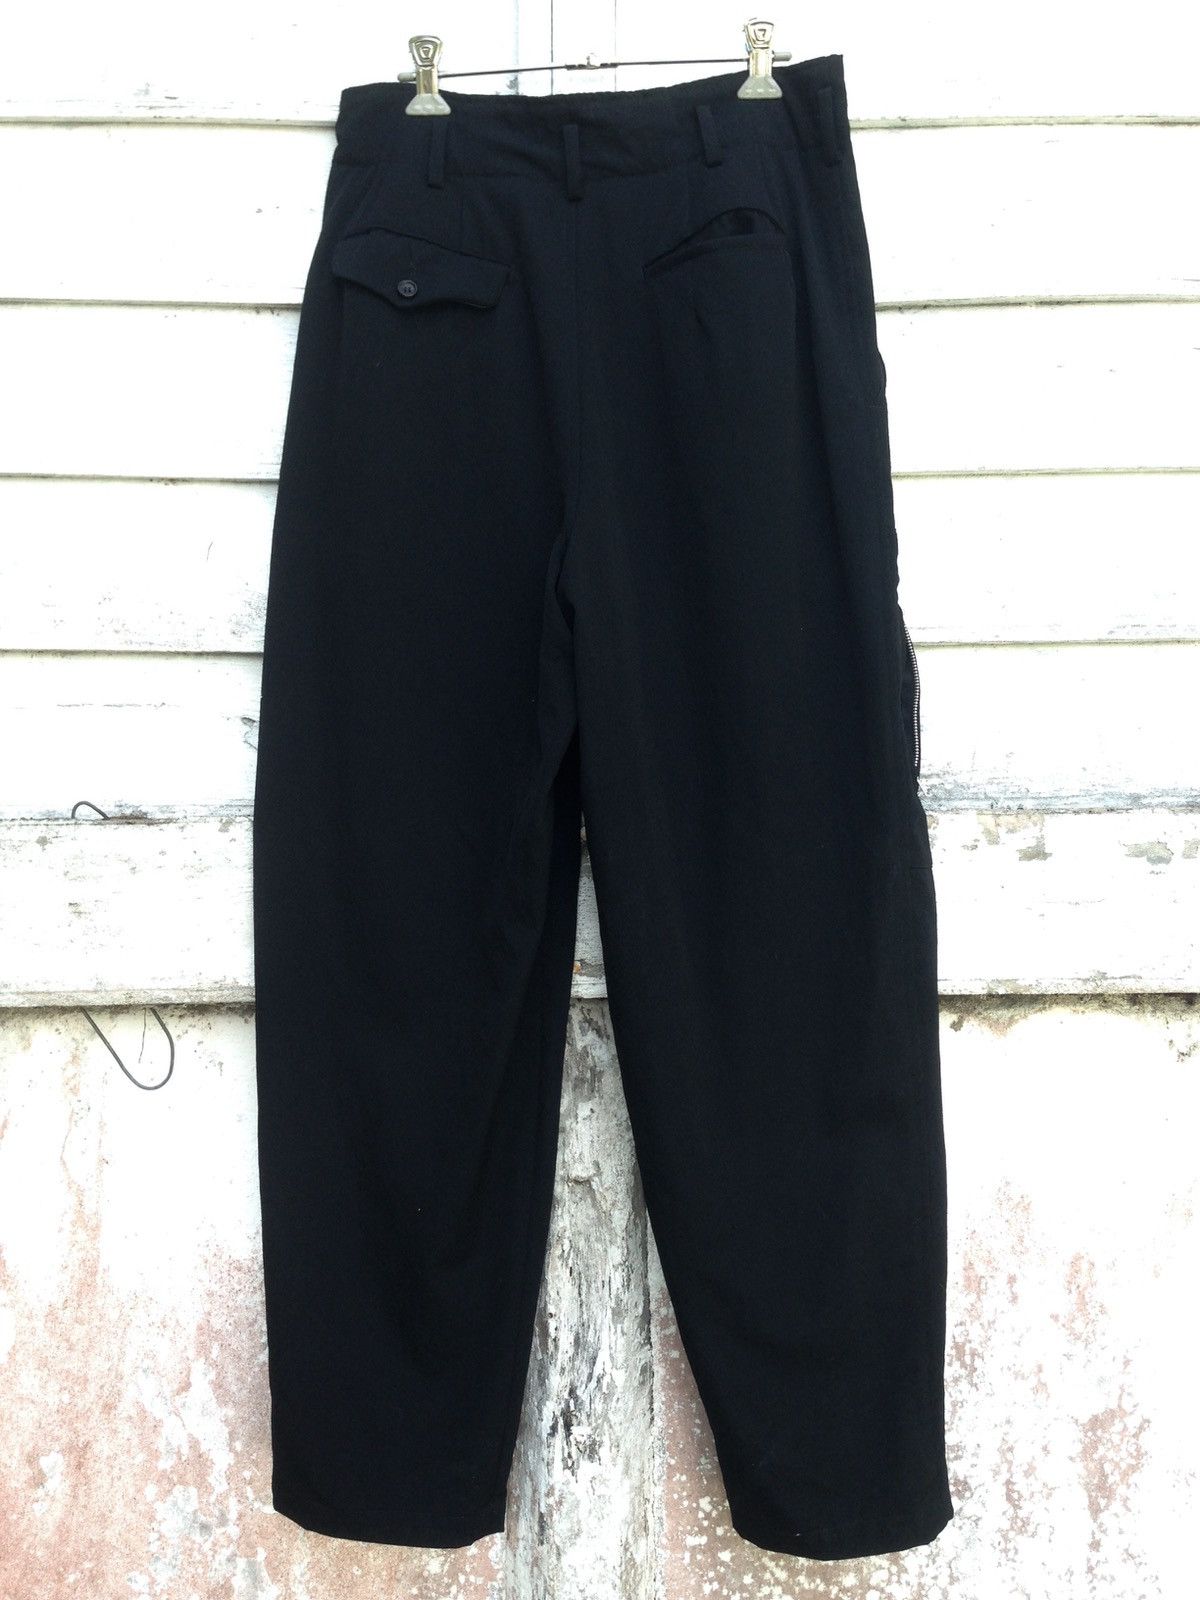 Archival Clothing - Alfaspin Ad 1993 Black Gothic 6 Pocket Baggy Trouser - 2